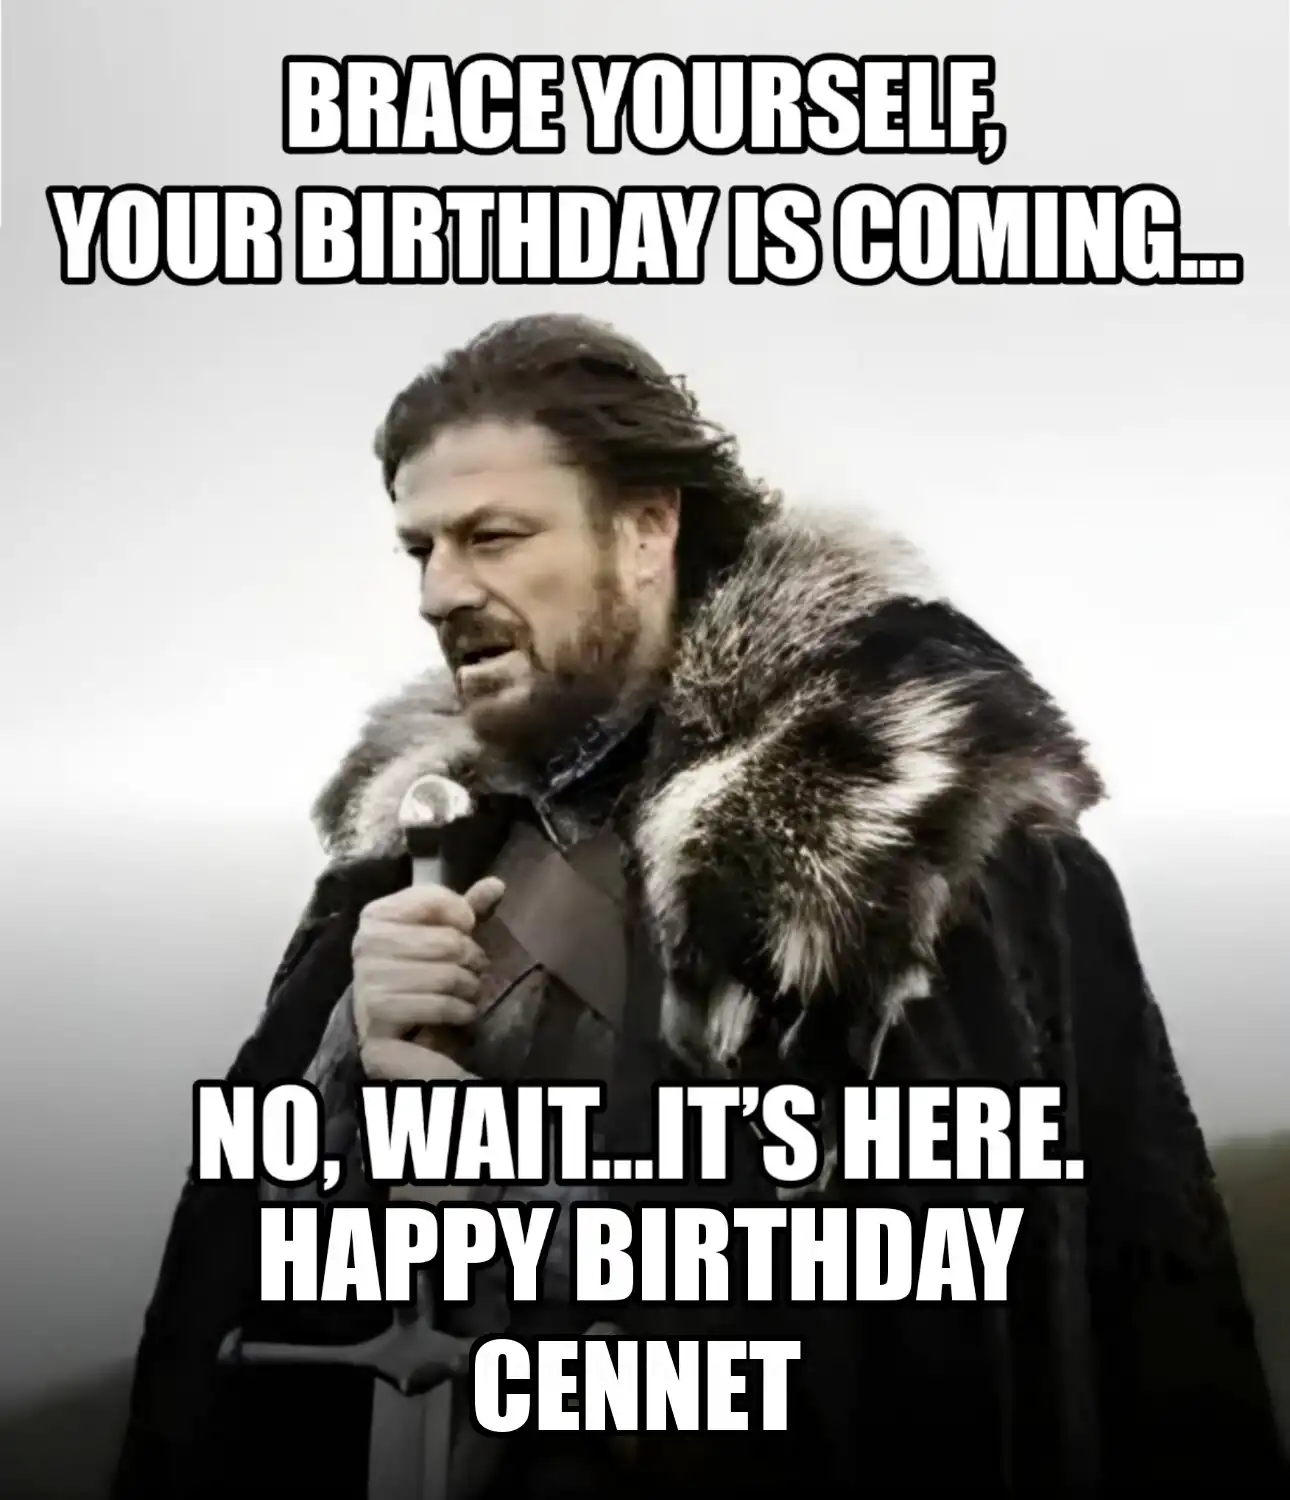 Happy Birthday Cennet Brace Yourself Your Birthday Is Coming Meme